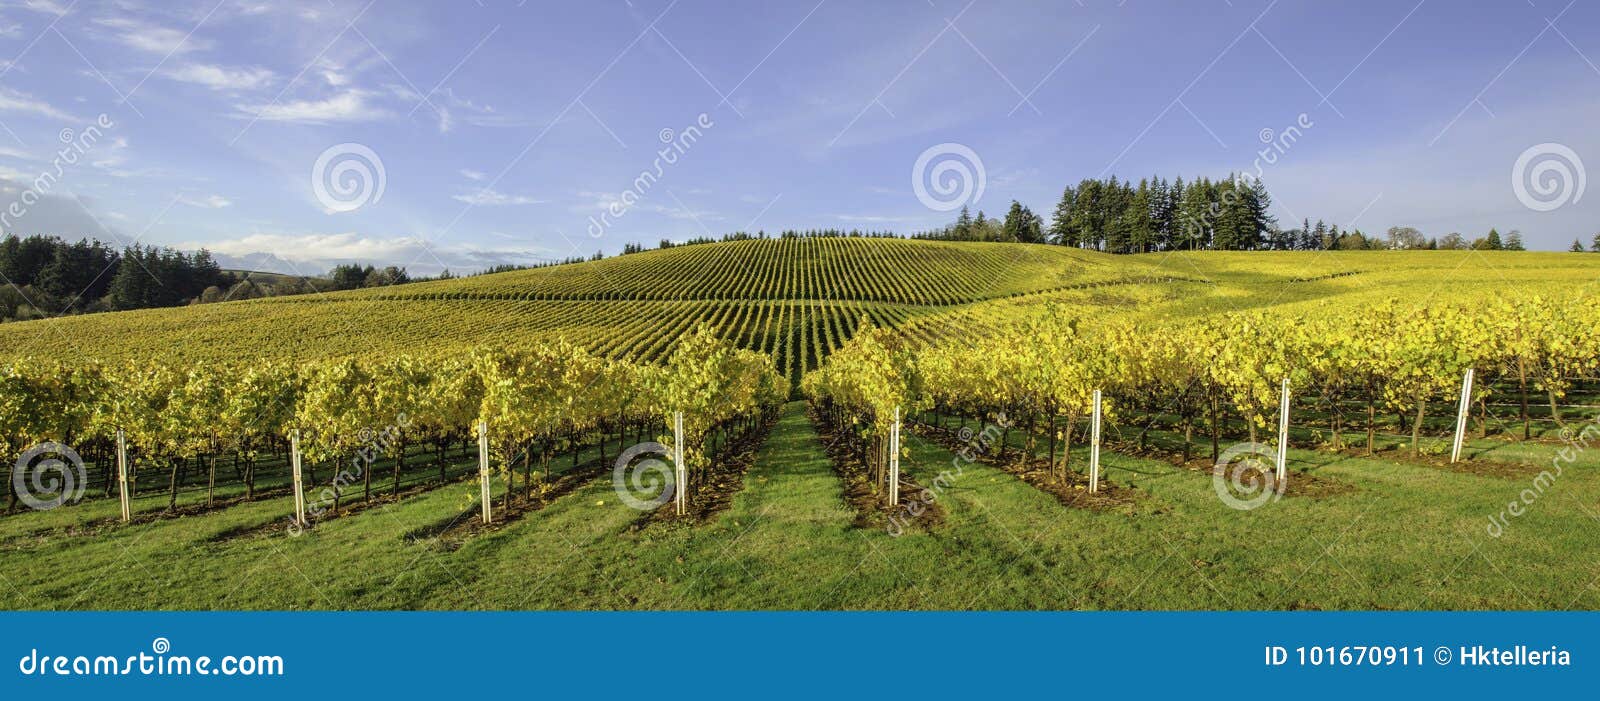 agriculture and fall colors of oregon vineyards